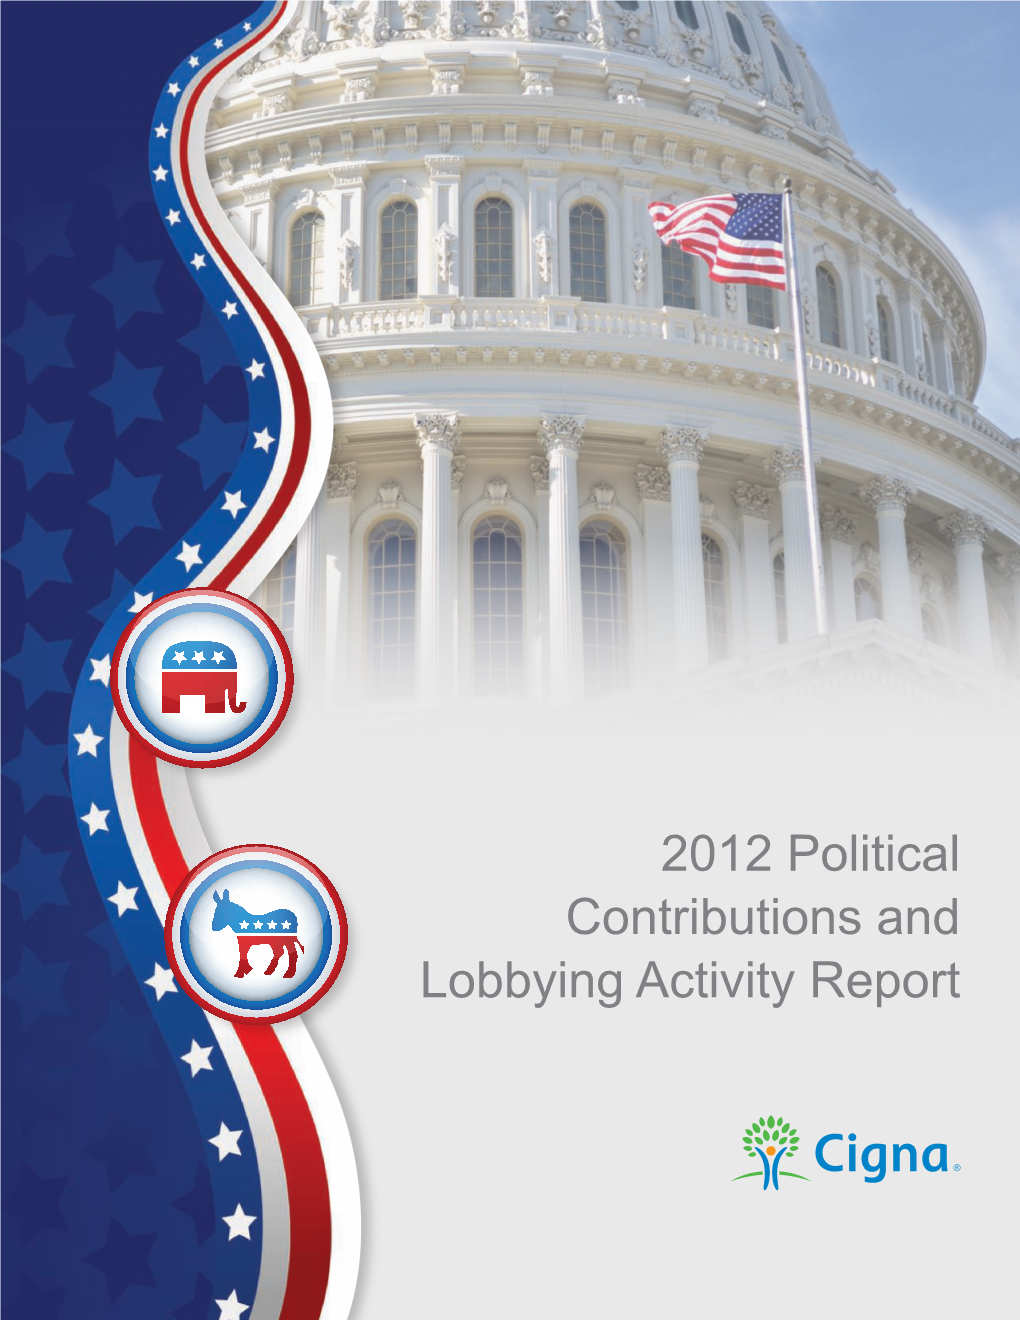 2012 Political Contributions and Lobbying Activity Report I Am Pleased to Share Our Annual Political Contributions Report